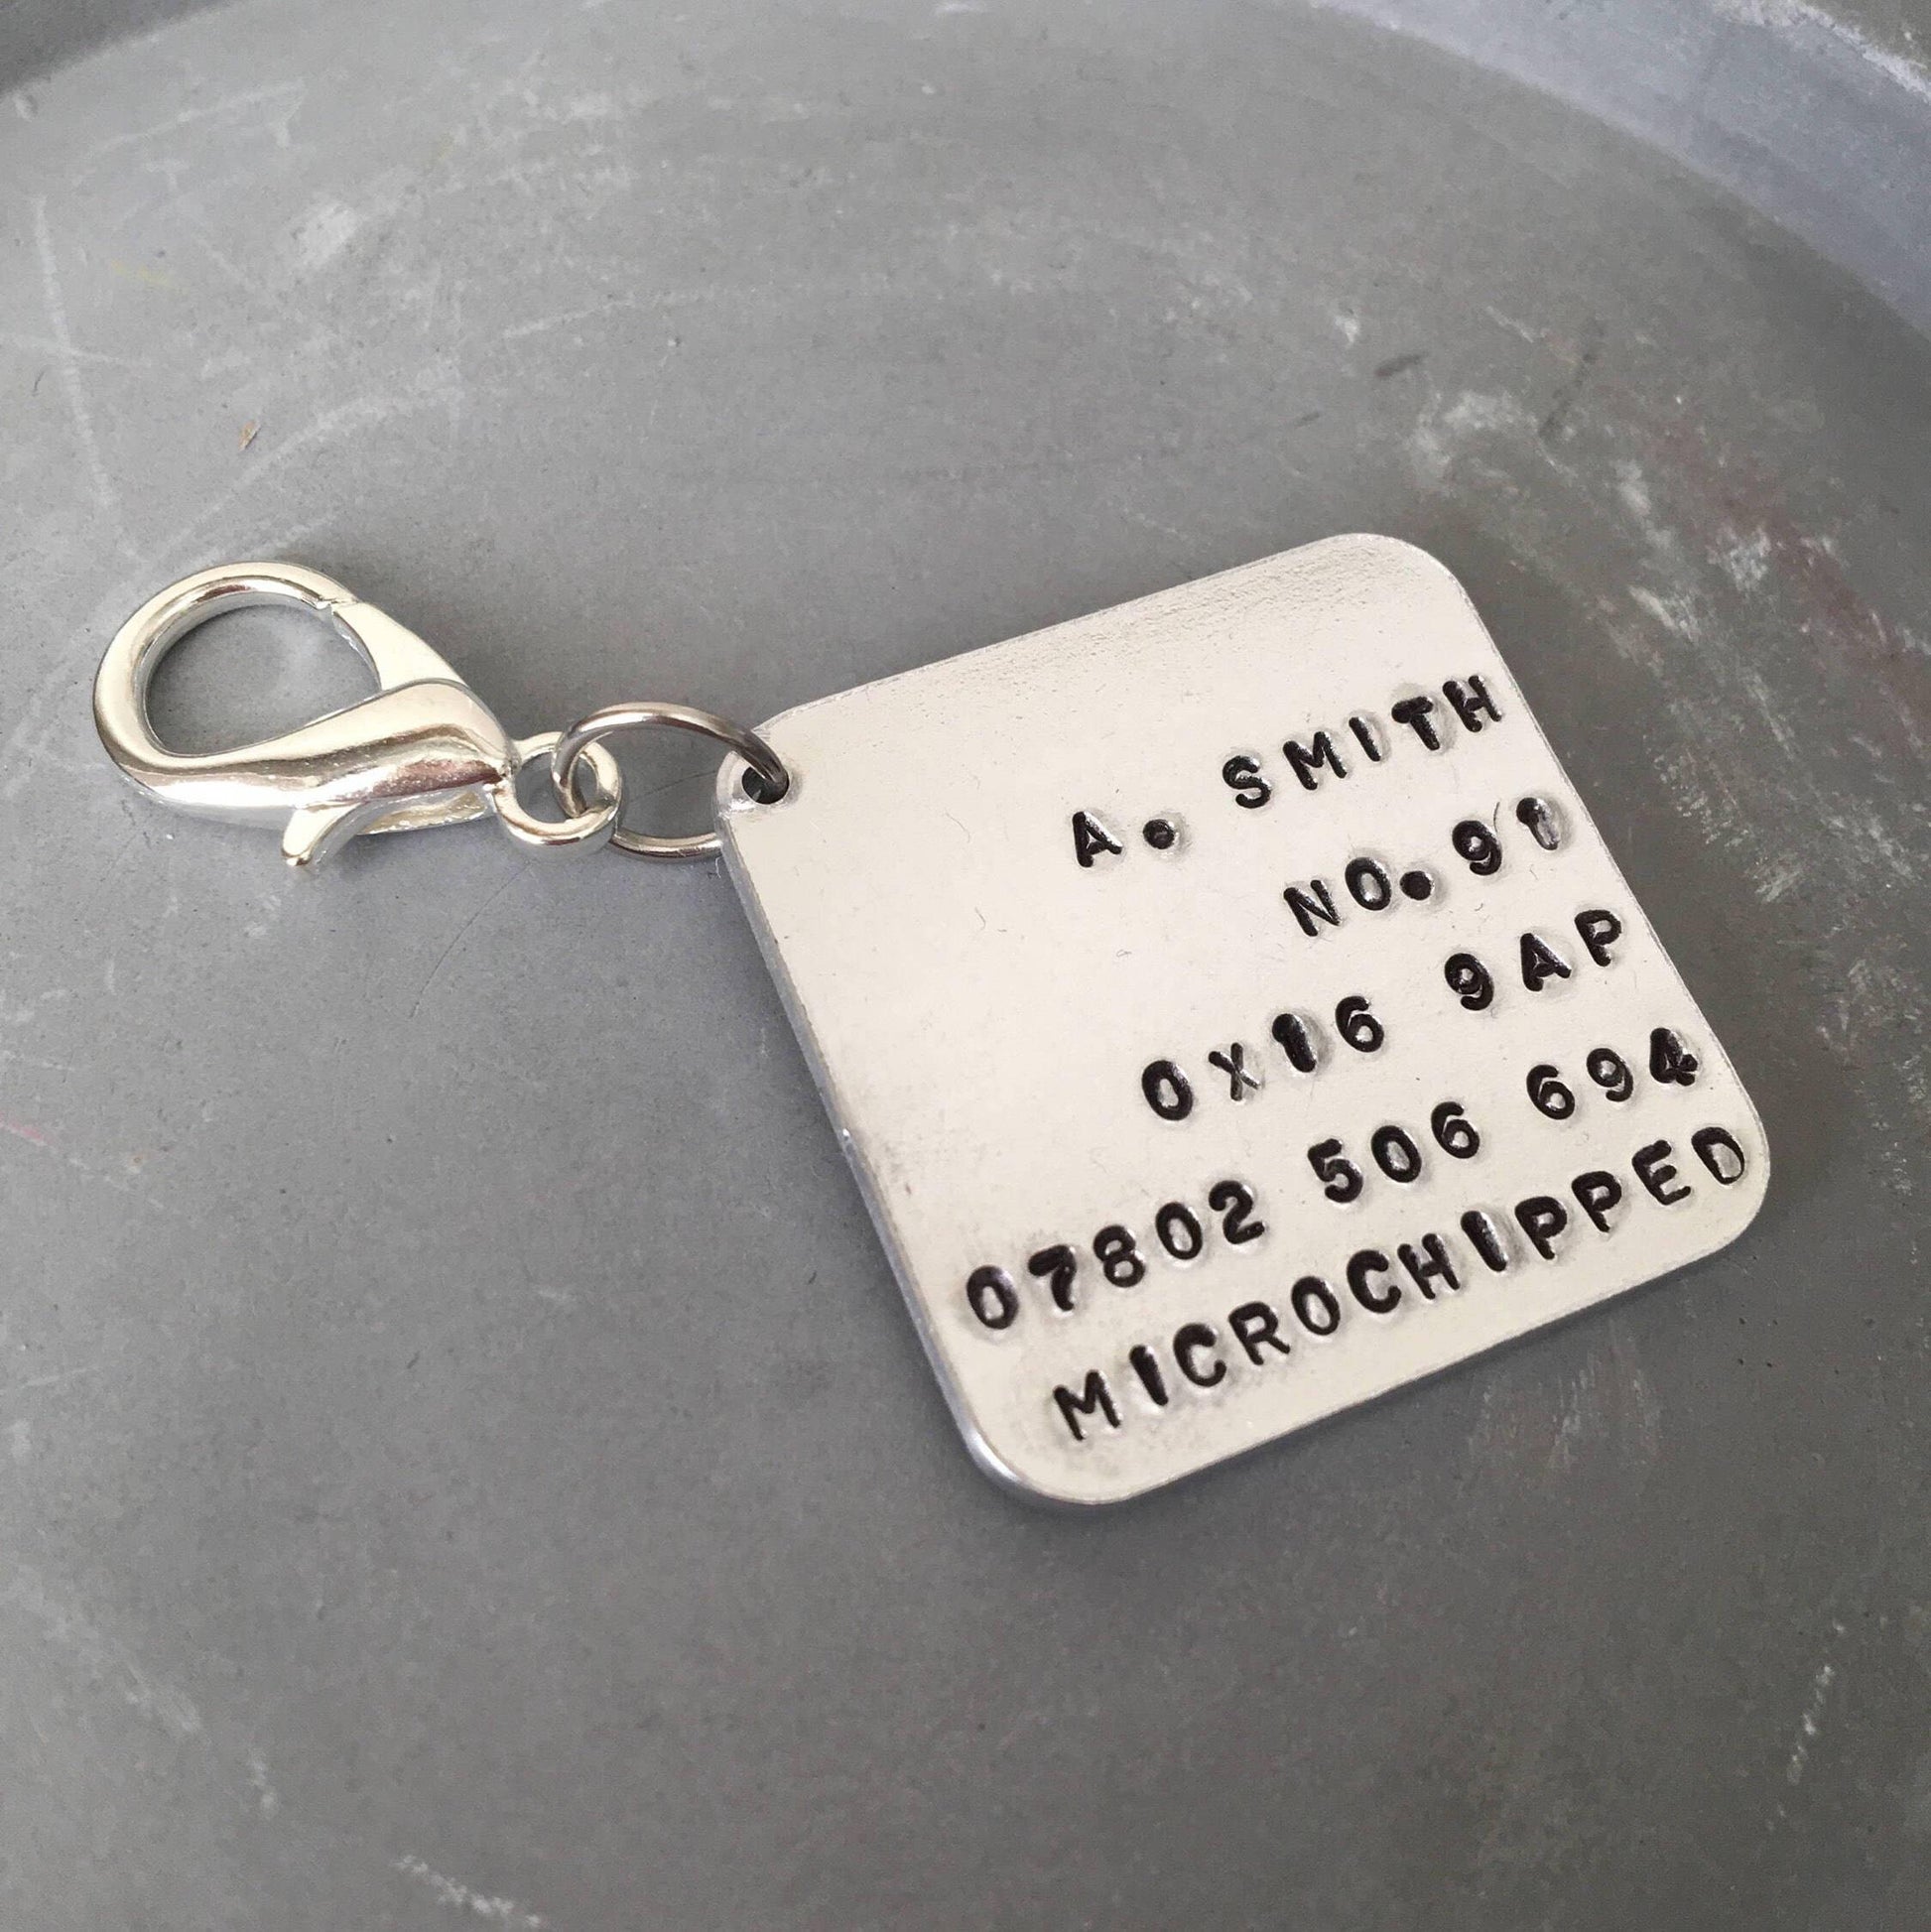 Square Dog ID Tag - The Little Stamping Co.